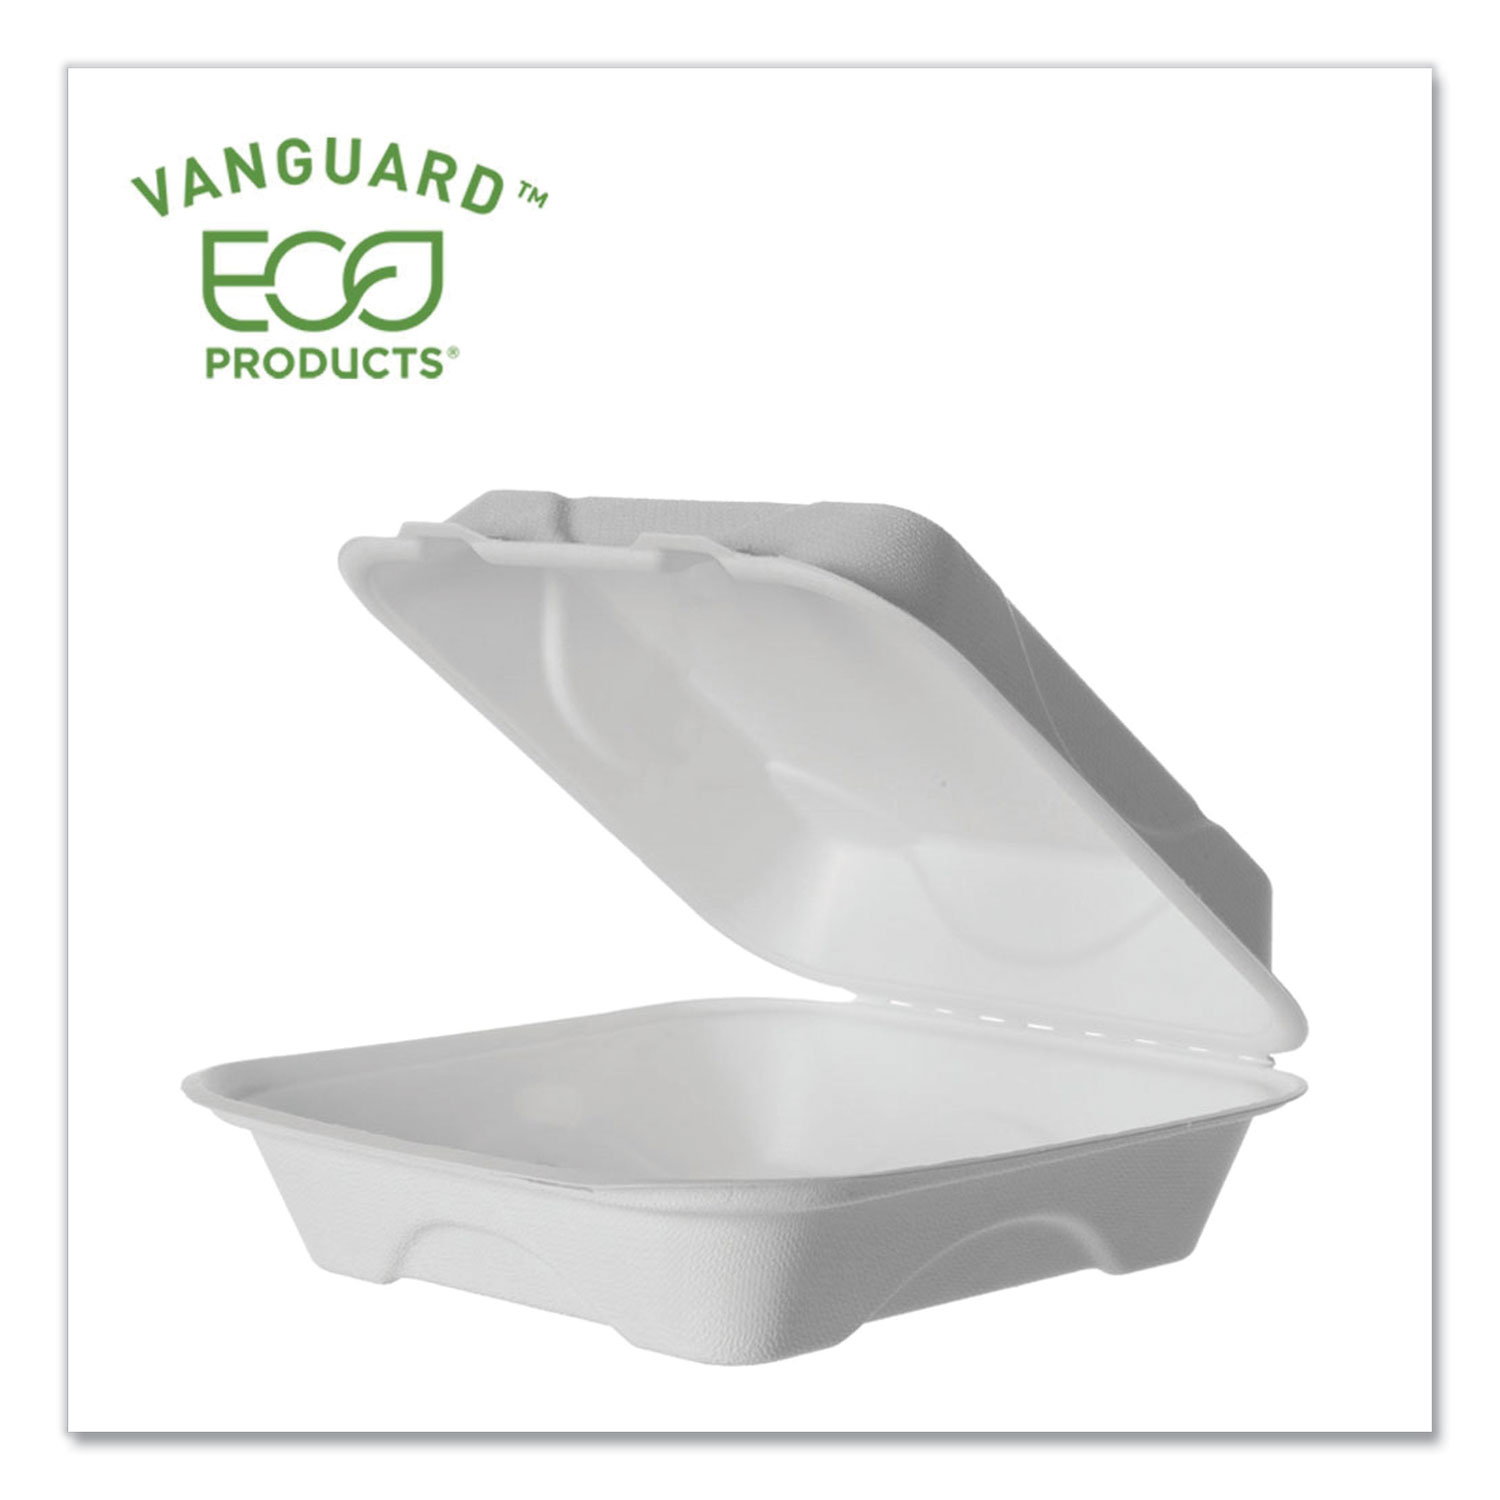  Eco-Products EP-HC81NFA Vanguard Renewable and Compostable Sugarcane Clamshells, 1-Compartment, 8 x 8 x 3, White, 200/Carton (ECOEPHC81NFA) 